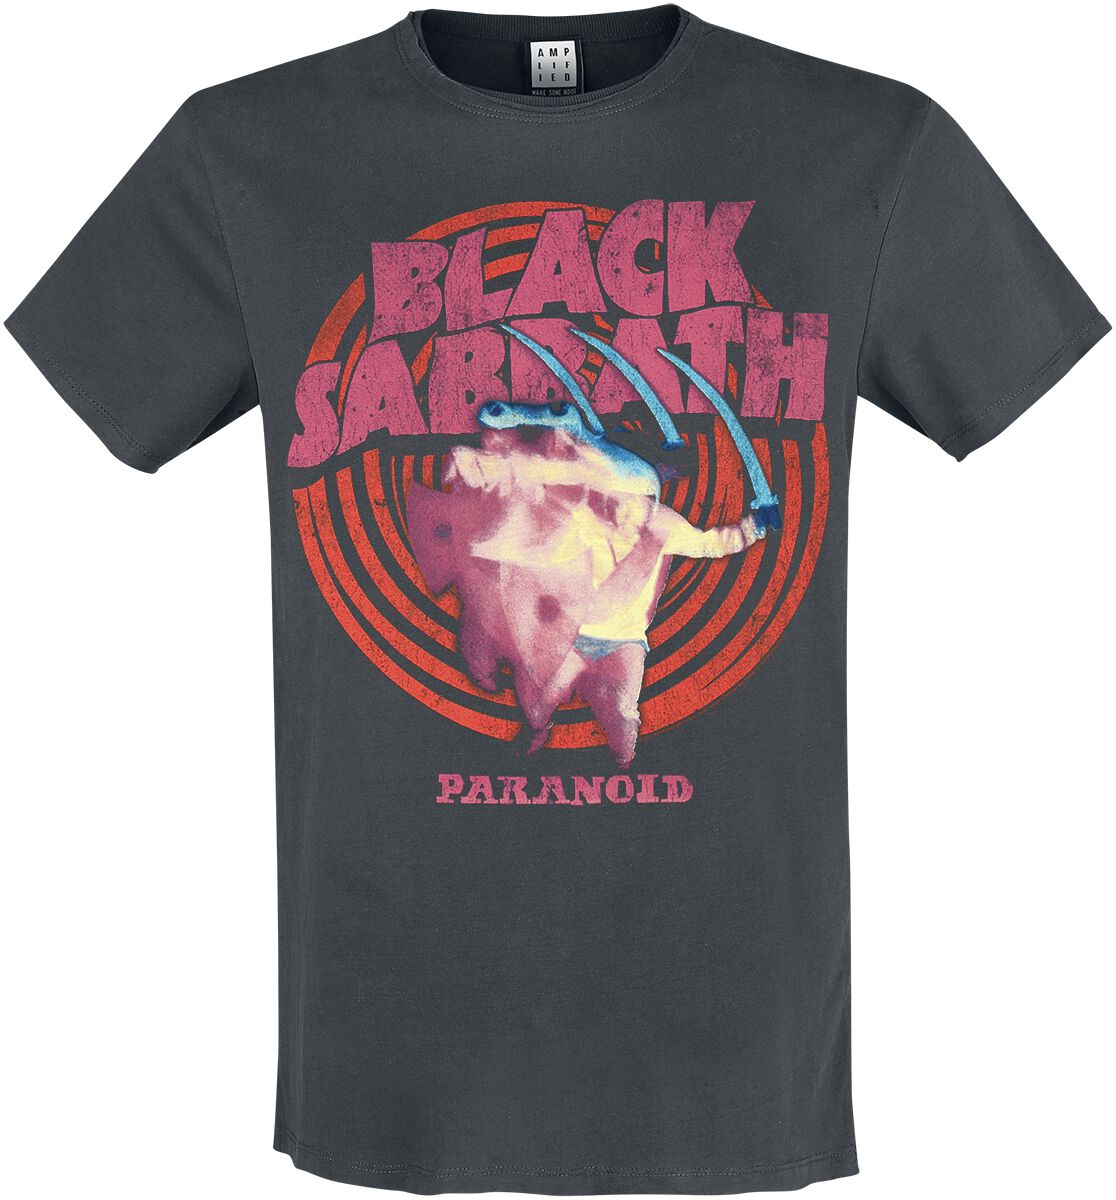 Black Sabbath Amplified Collection - Paranoid T-Shirt charcoal in L